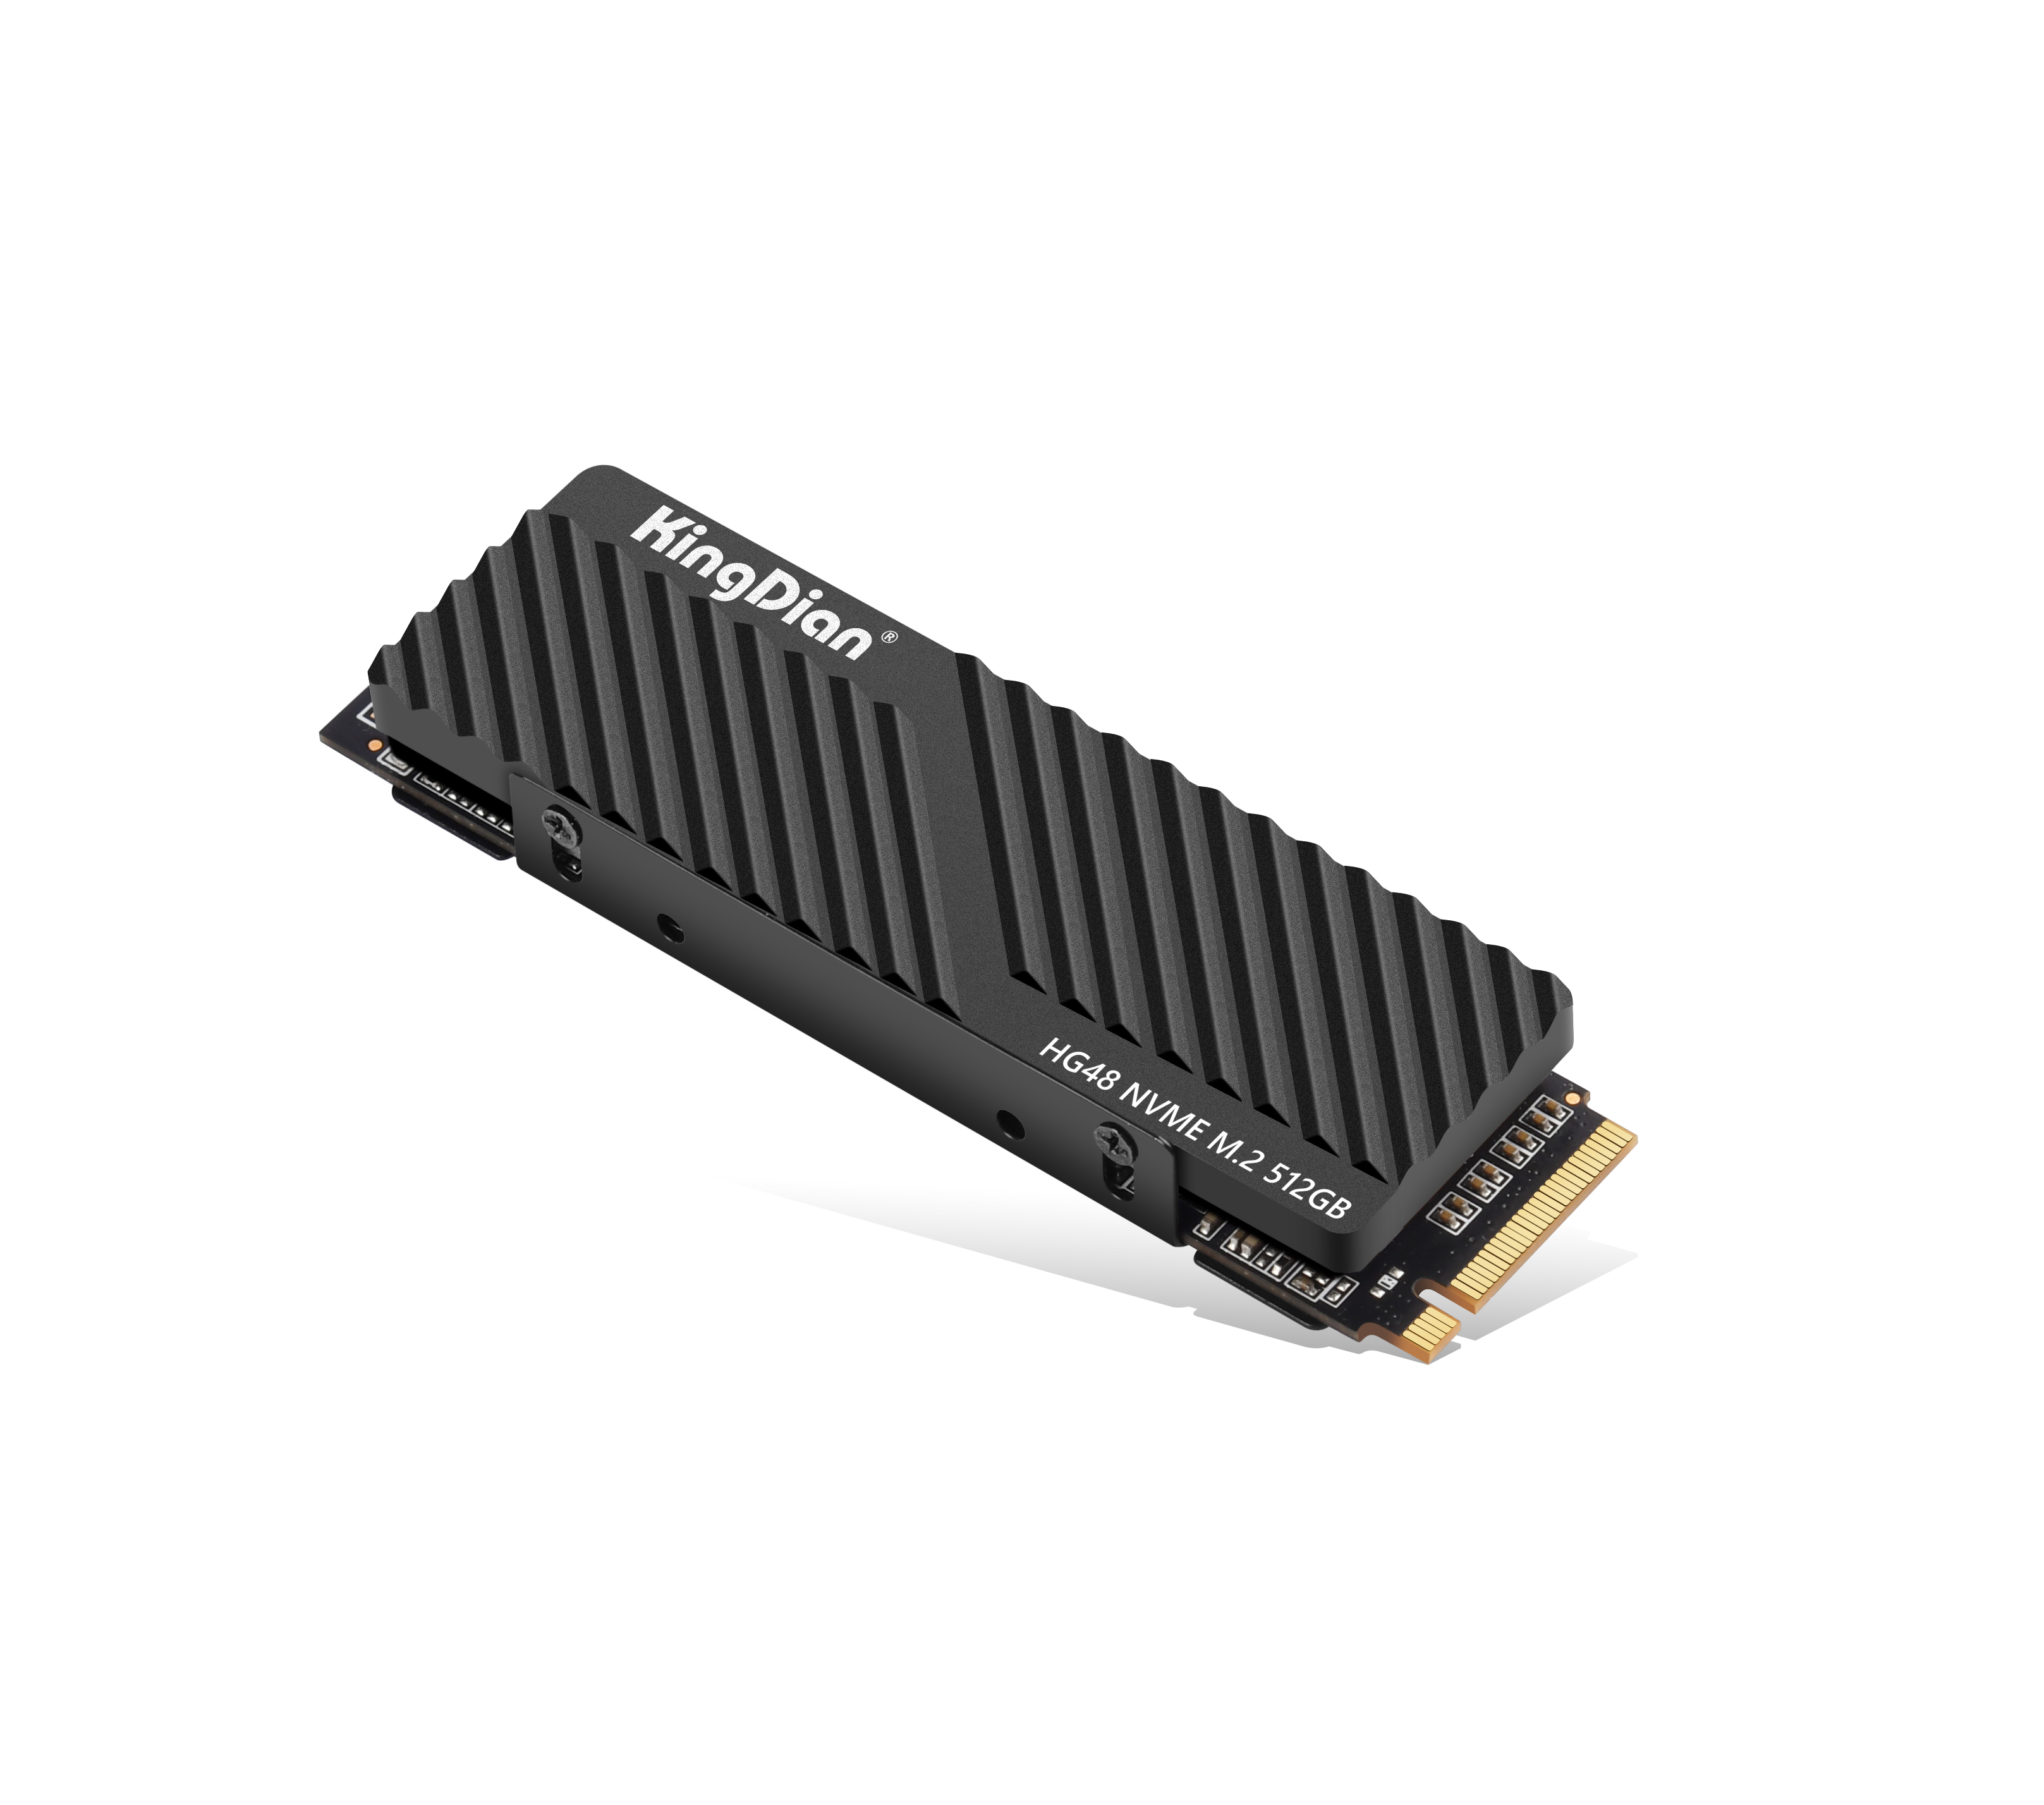 KingDian GEN4 NVMe SSD HG48, High-Performance Storage for Gamers and Professionals